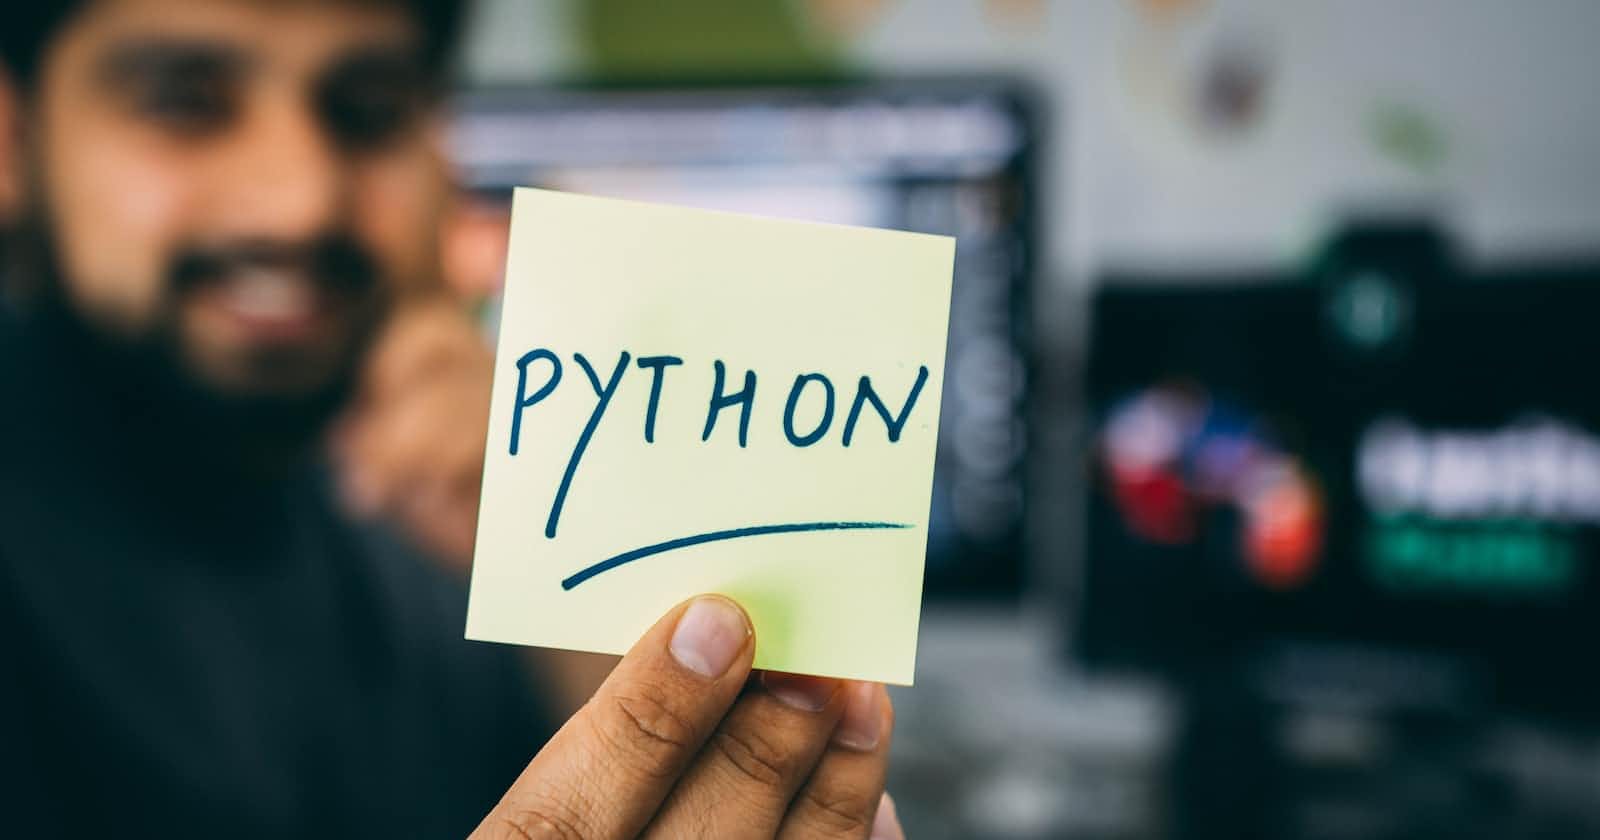 Python!
Interpreted or Compiled language.
Let's Discuss